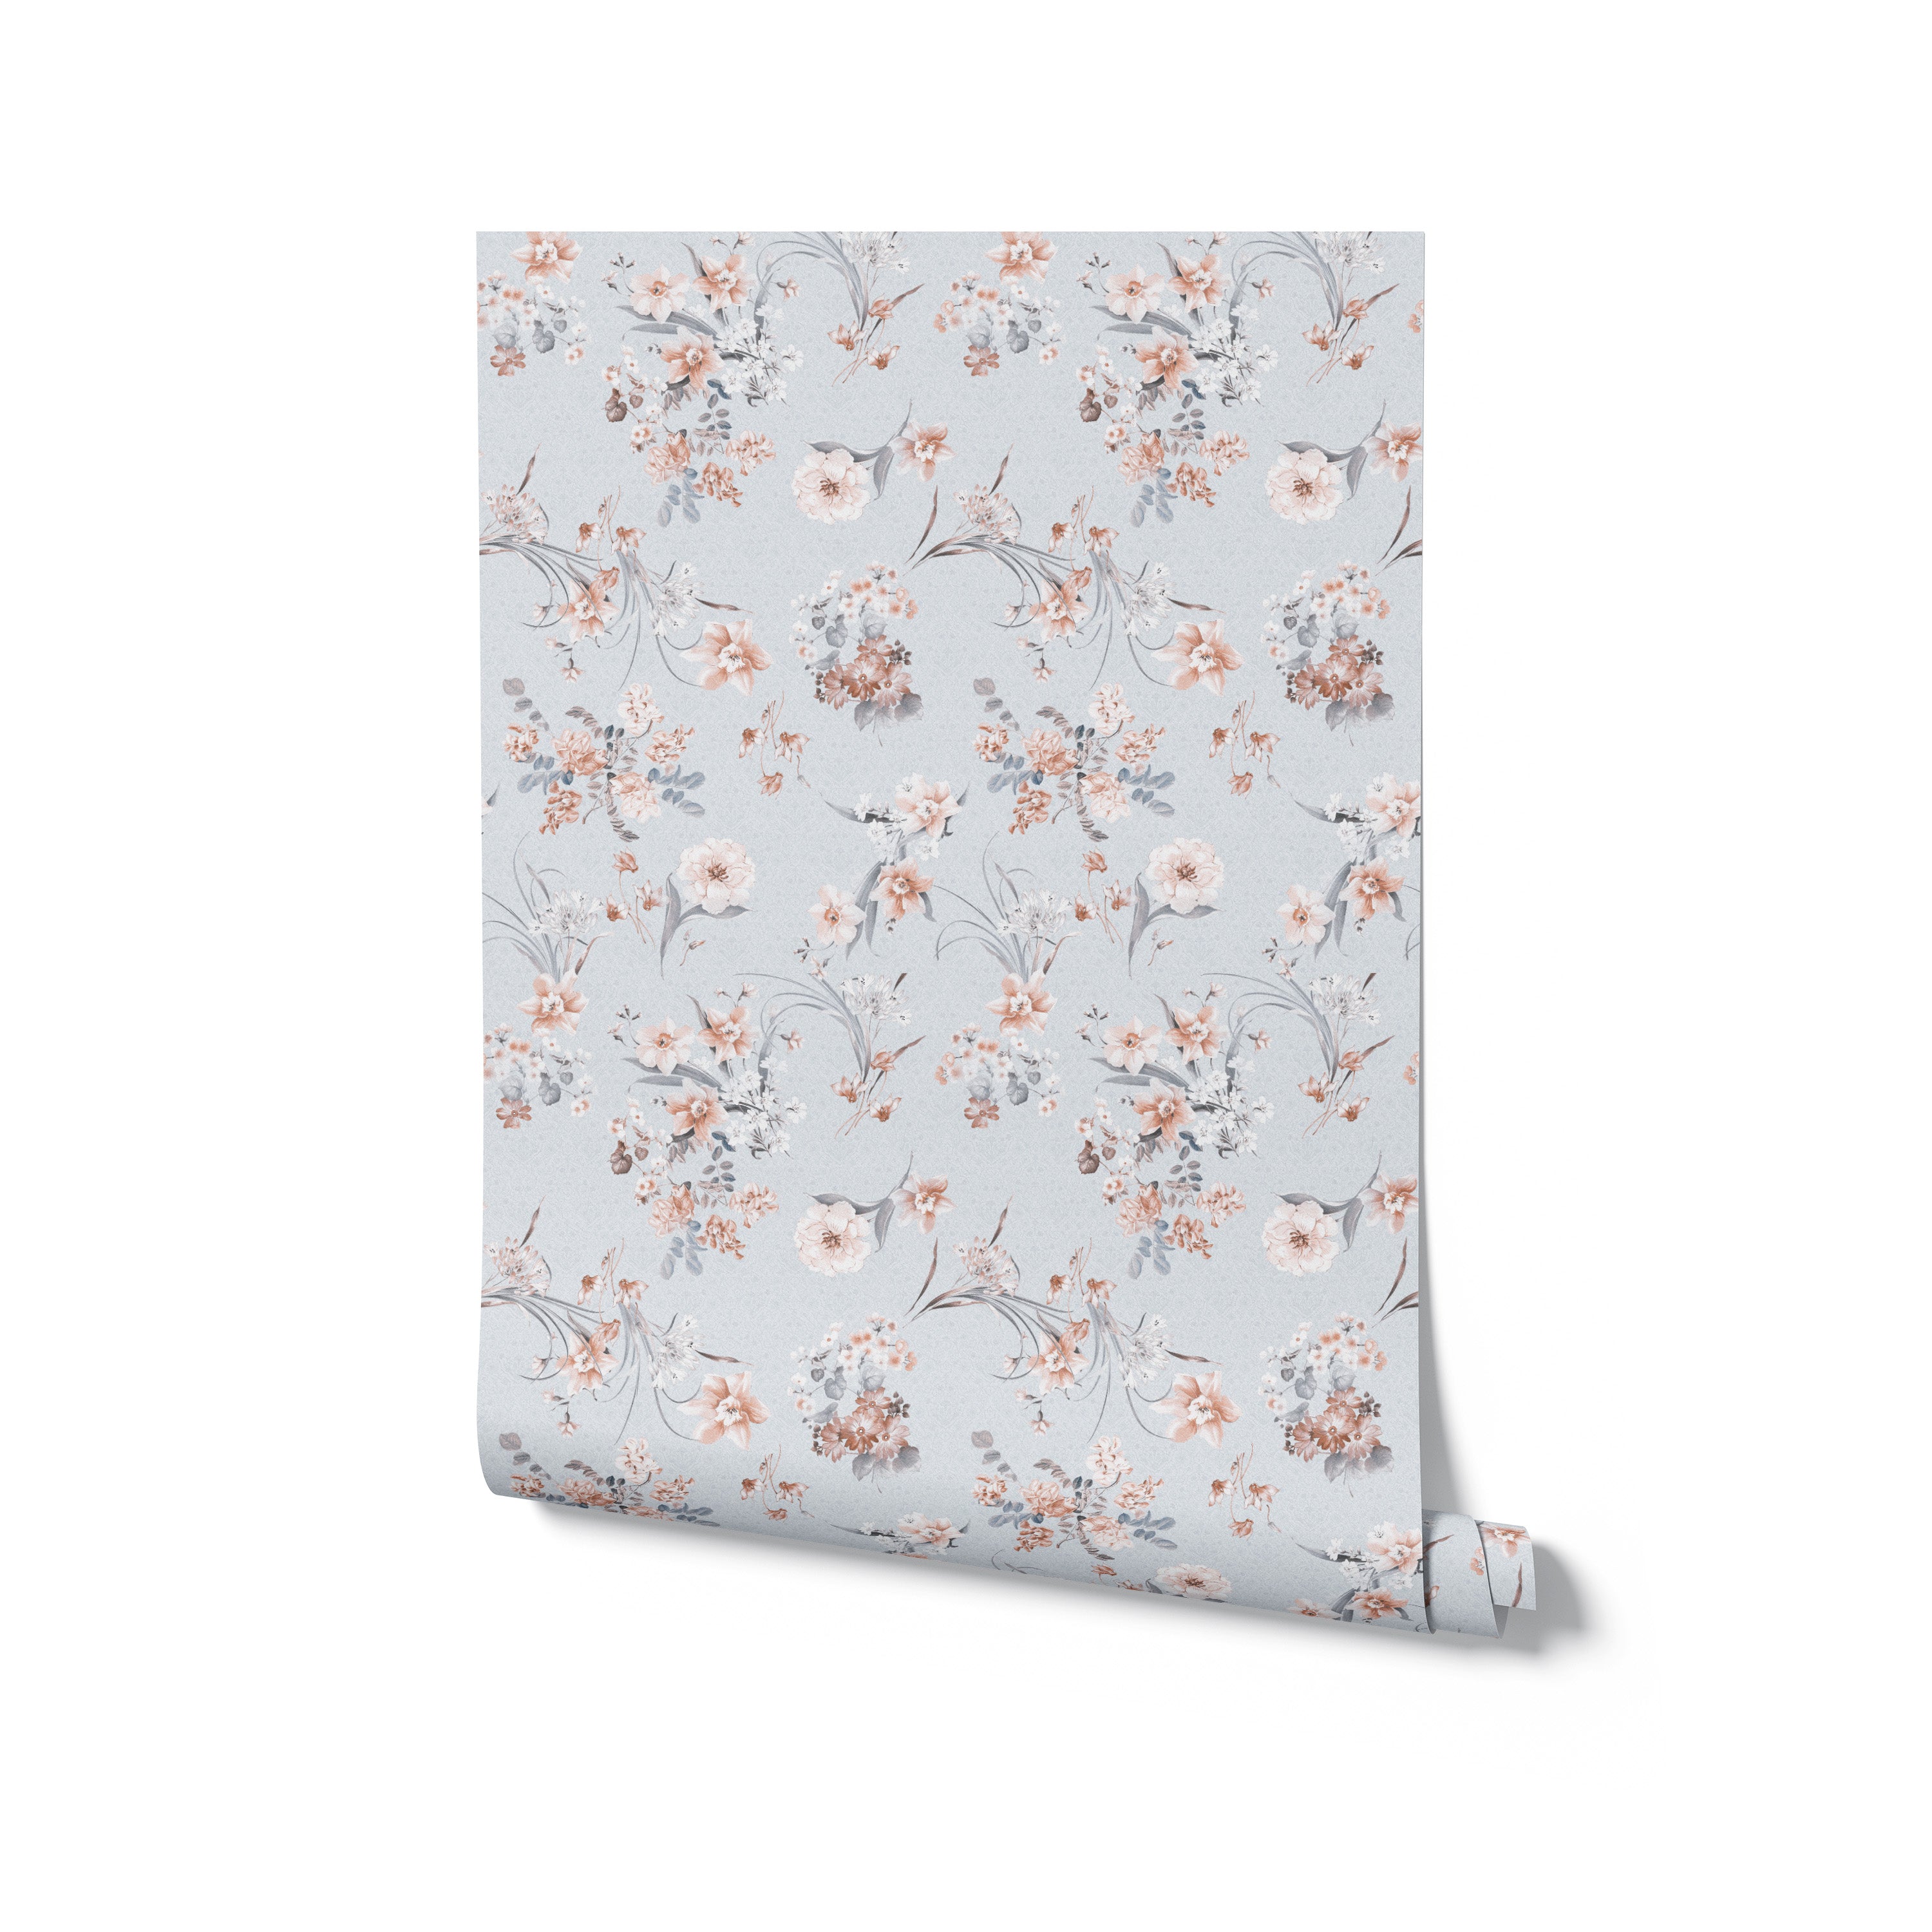 A roll of the Boudoir Blooms Wallpaper unrolled slightly to show the beautiful floral pattern. The wallpaper features a continuous design of delicate flowers and leaves in soft peach and gray, ideal for adding a romantic and soft atmosphere to any room.